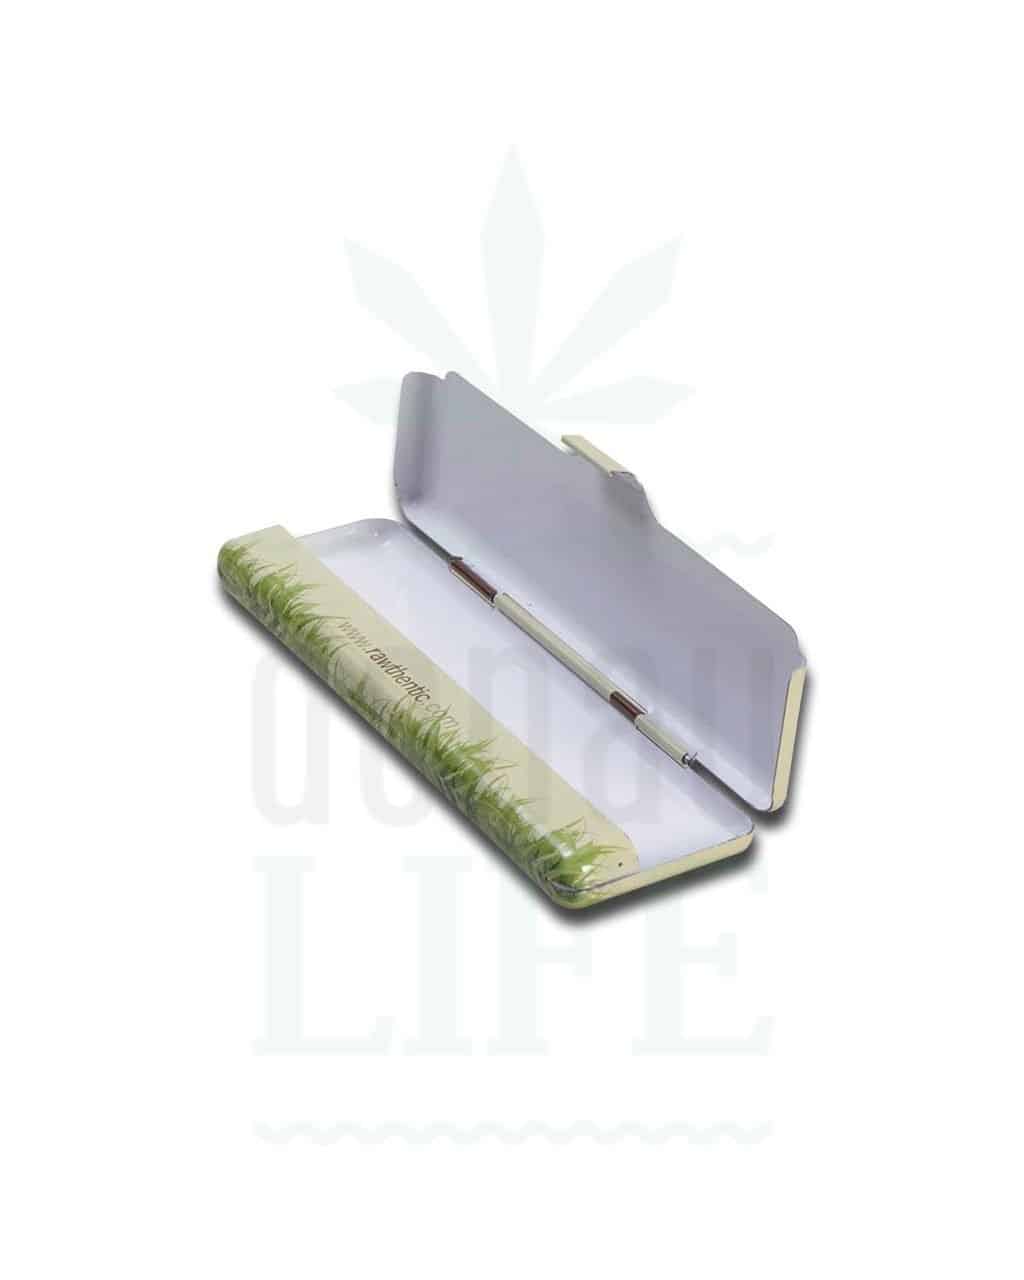 Storage RAW Papers Metal Box King Size | Green Grass